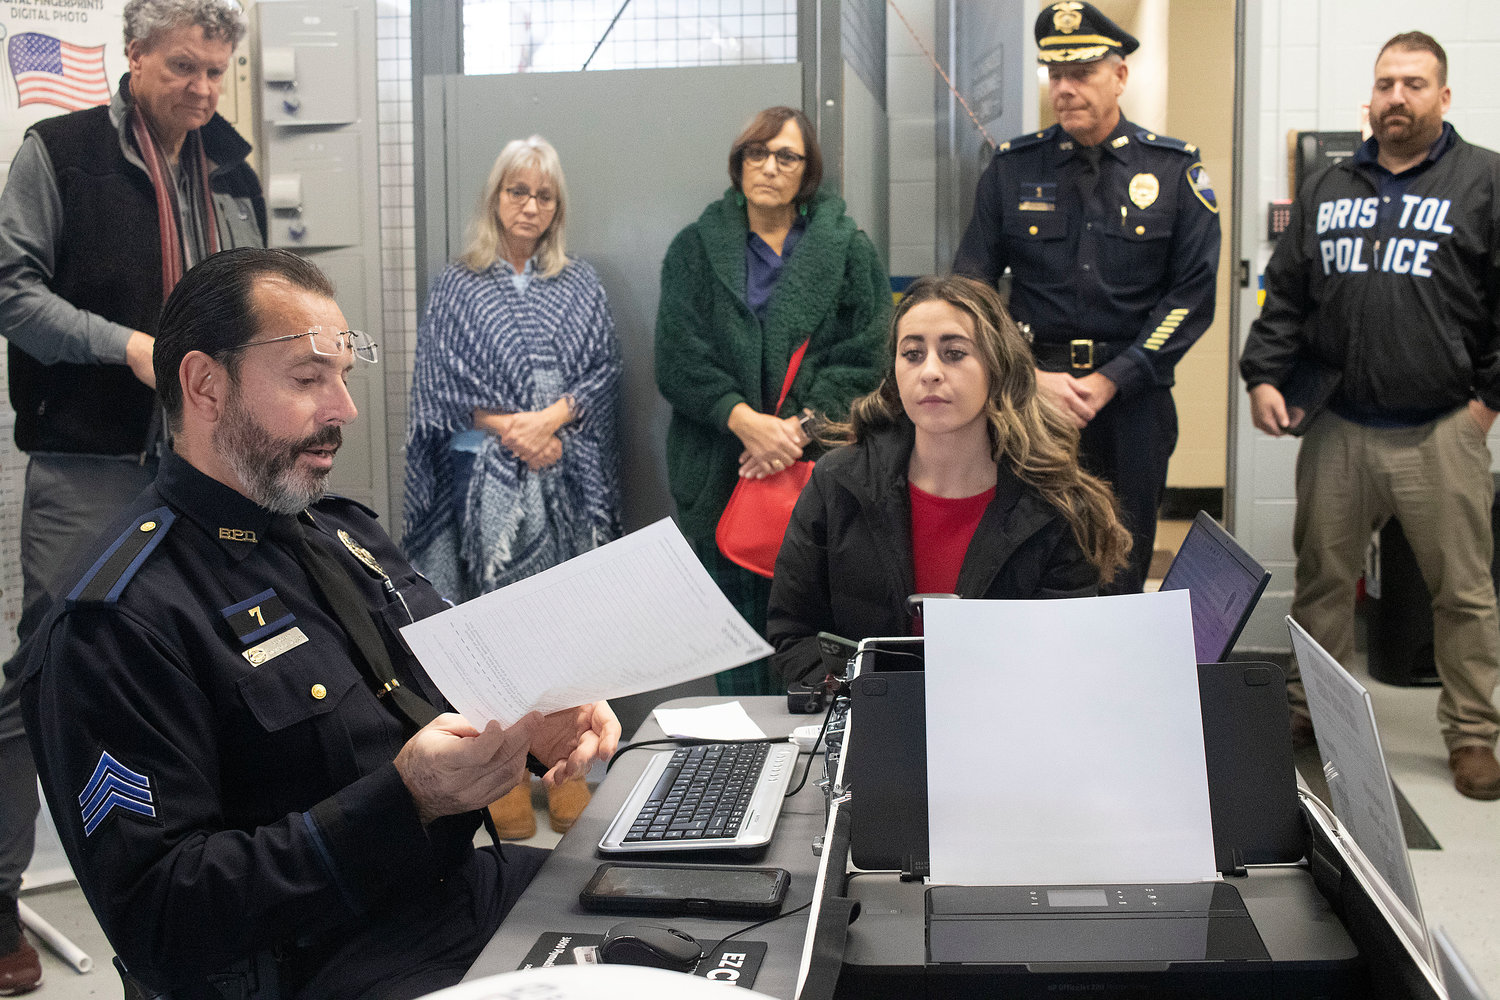 Sgt. Ricardo Mourato demonstrates the process of registering with the Child ID system using Channel 12 reporter Dana Casullo as an example, while (l-r) Sen. Wally Felag, resident Candice Dacosta, Senior Center Director Maria Ursini, Chief Keving Lynch, and Patrolman Brandon Correia look on.